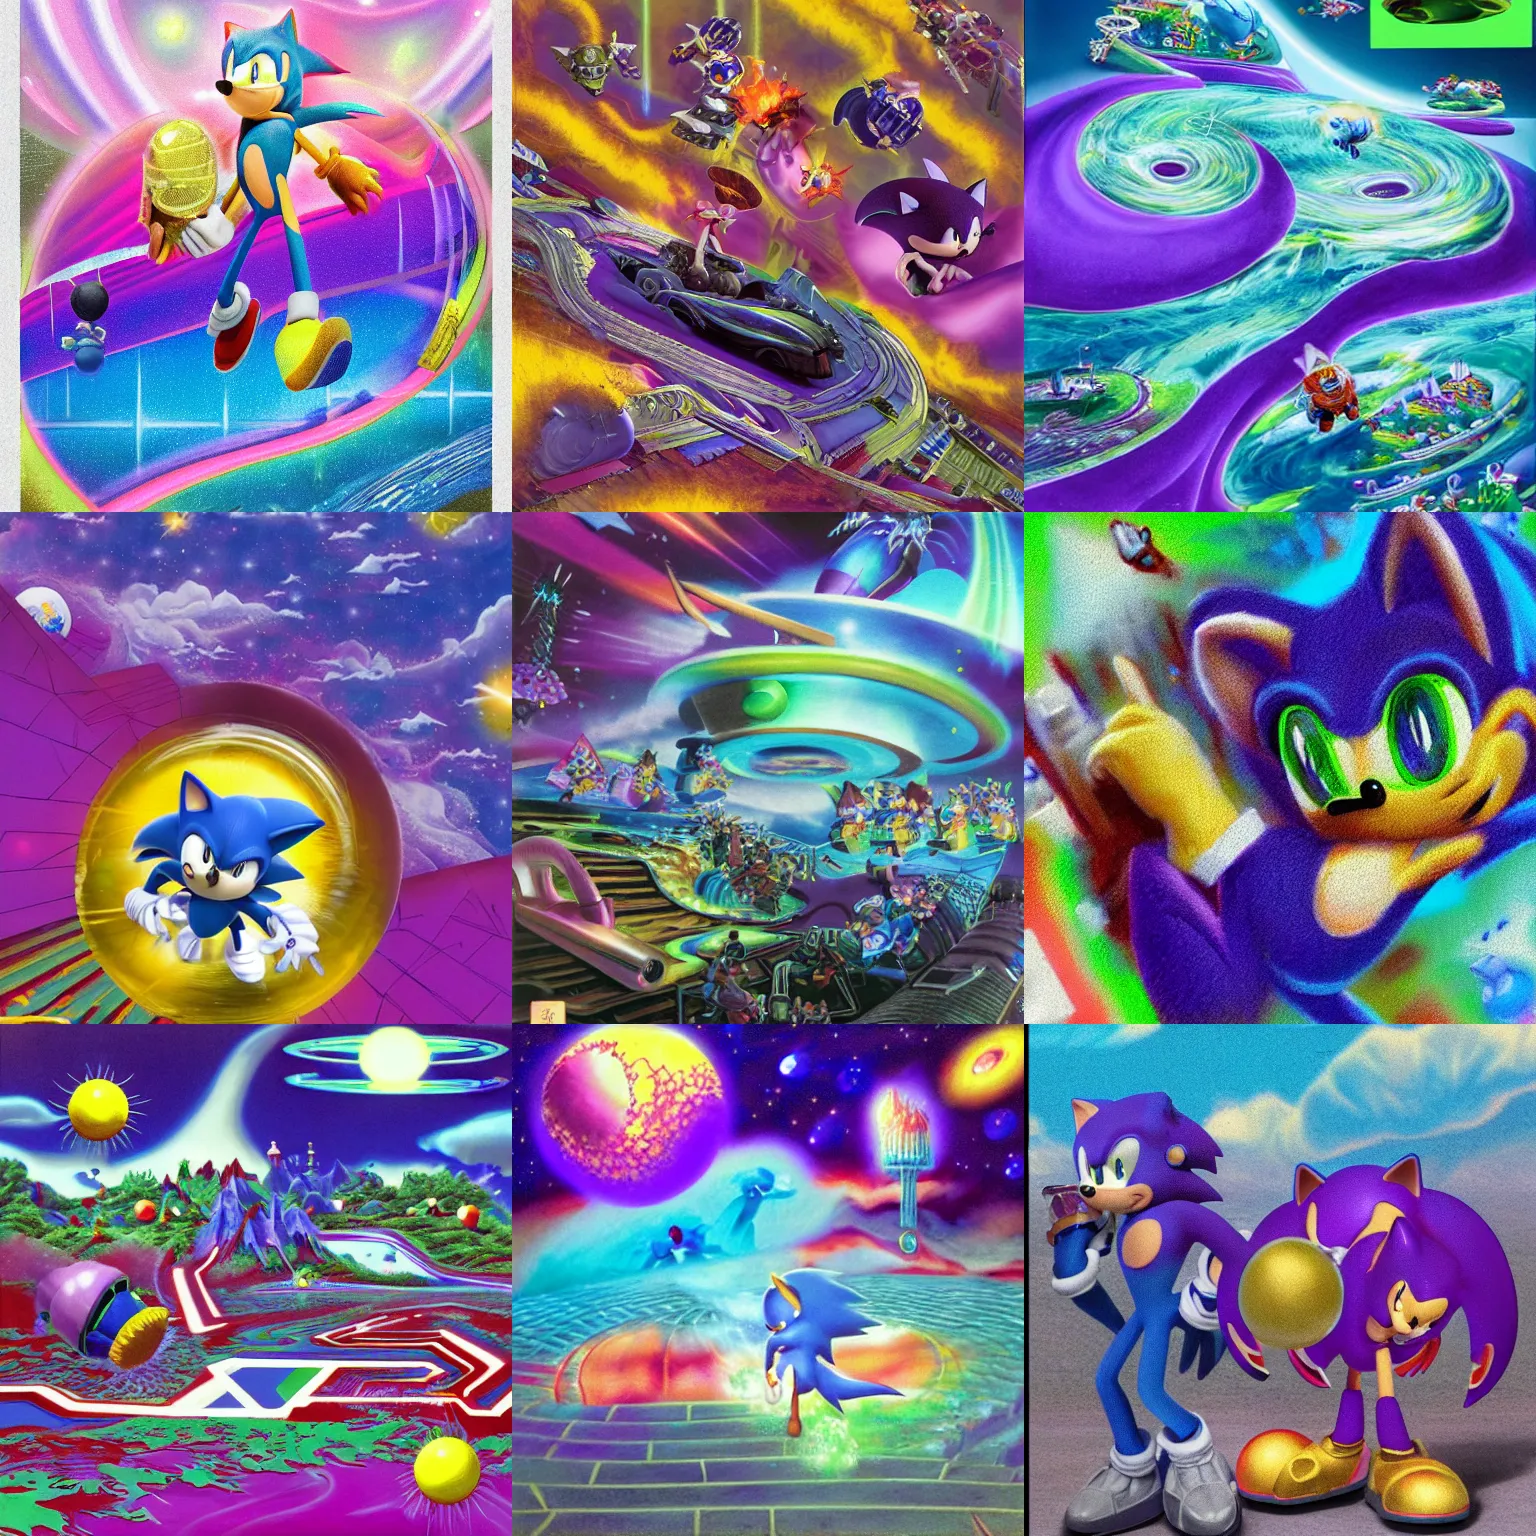 Prompt: dreaming of sonic hedgehog portrait deconstructivist claymation scifi matte painting landscape of a surreal stars, jazz cup detailed professional soft pastels high quality airbrush art album cover of a liquid dissolving airbrush art lsd sonic the hedgehog swimming through cyberspace purple teal checkerboard background 1 9 9 0 s 1 9 9 2 sega genesis rareware video game album cover